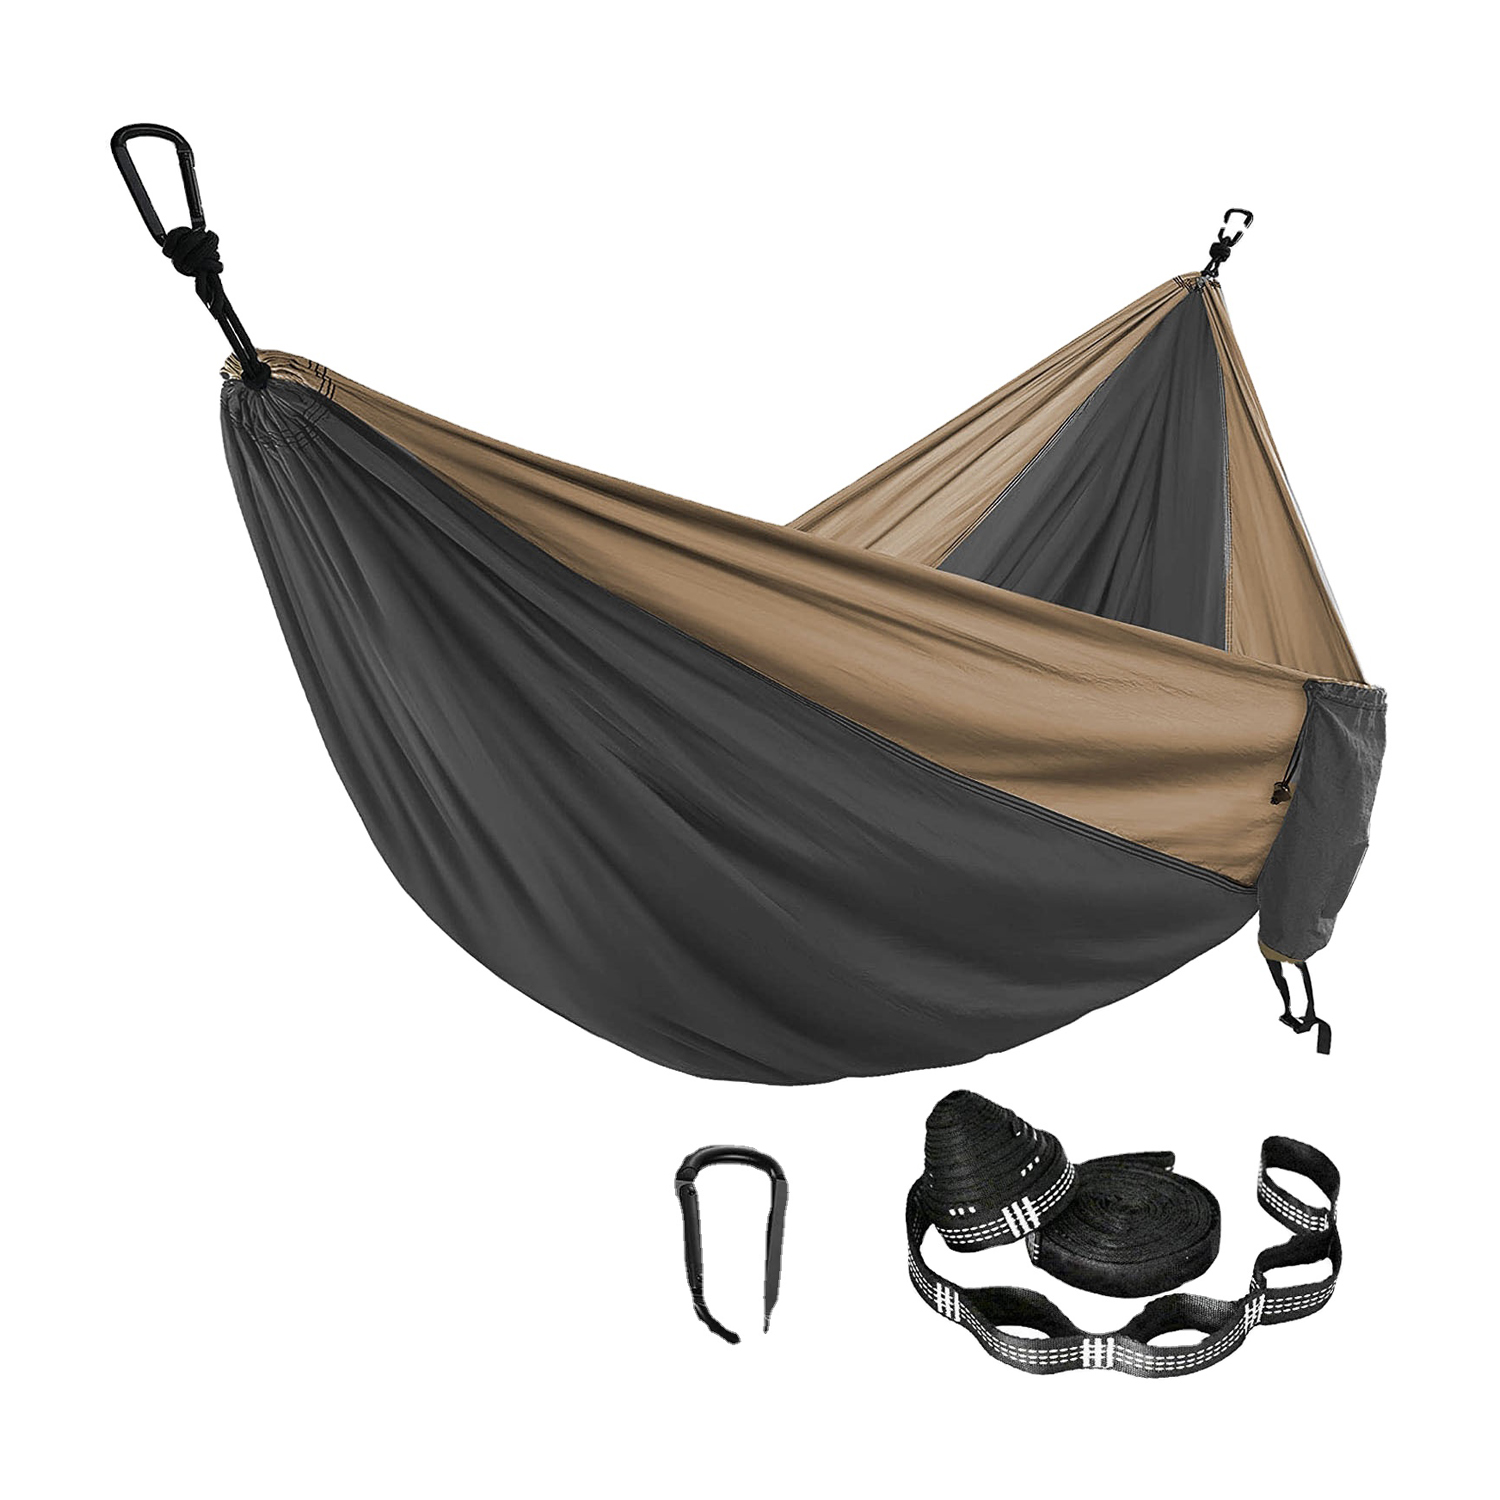 Oversize Double Person Hammock with Hammock Straps and Black Carabiner